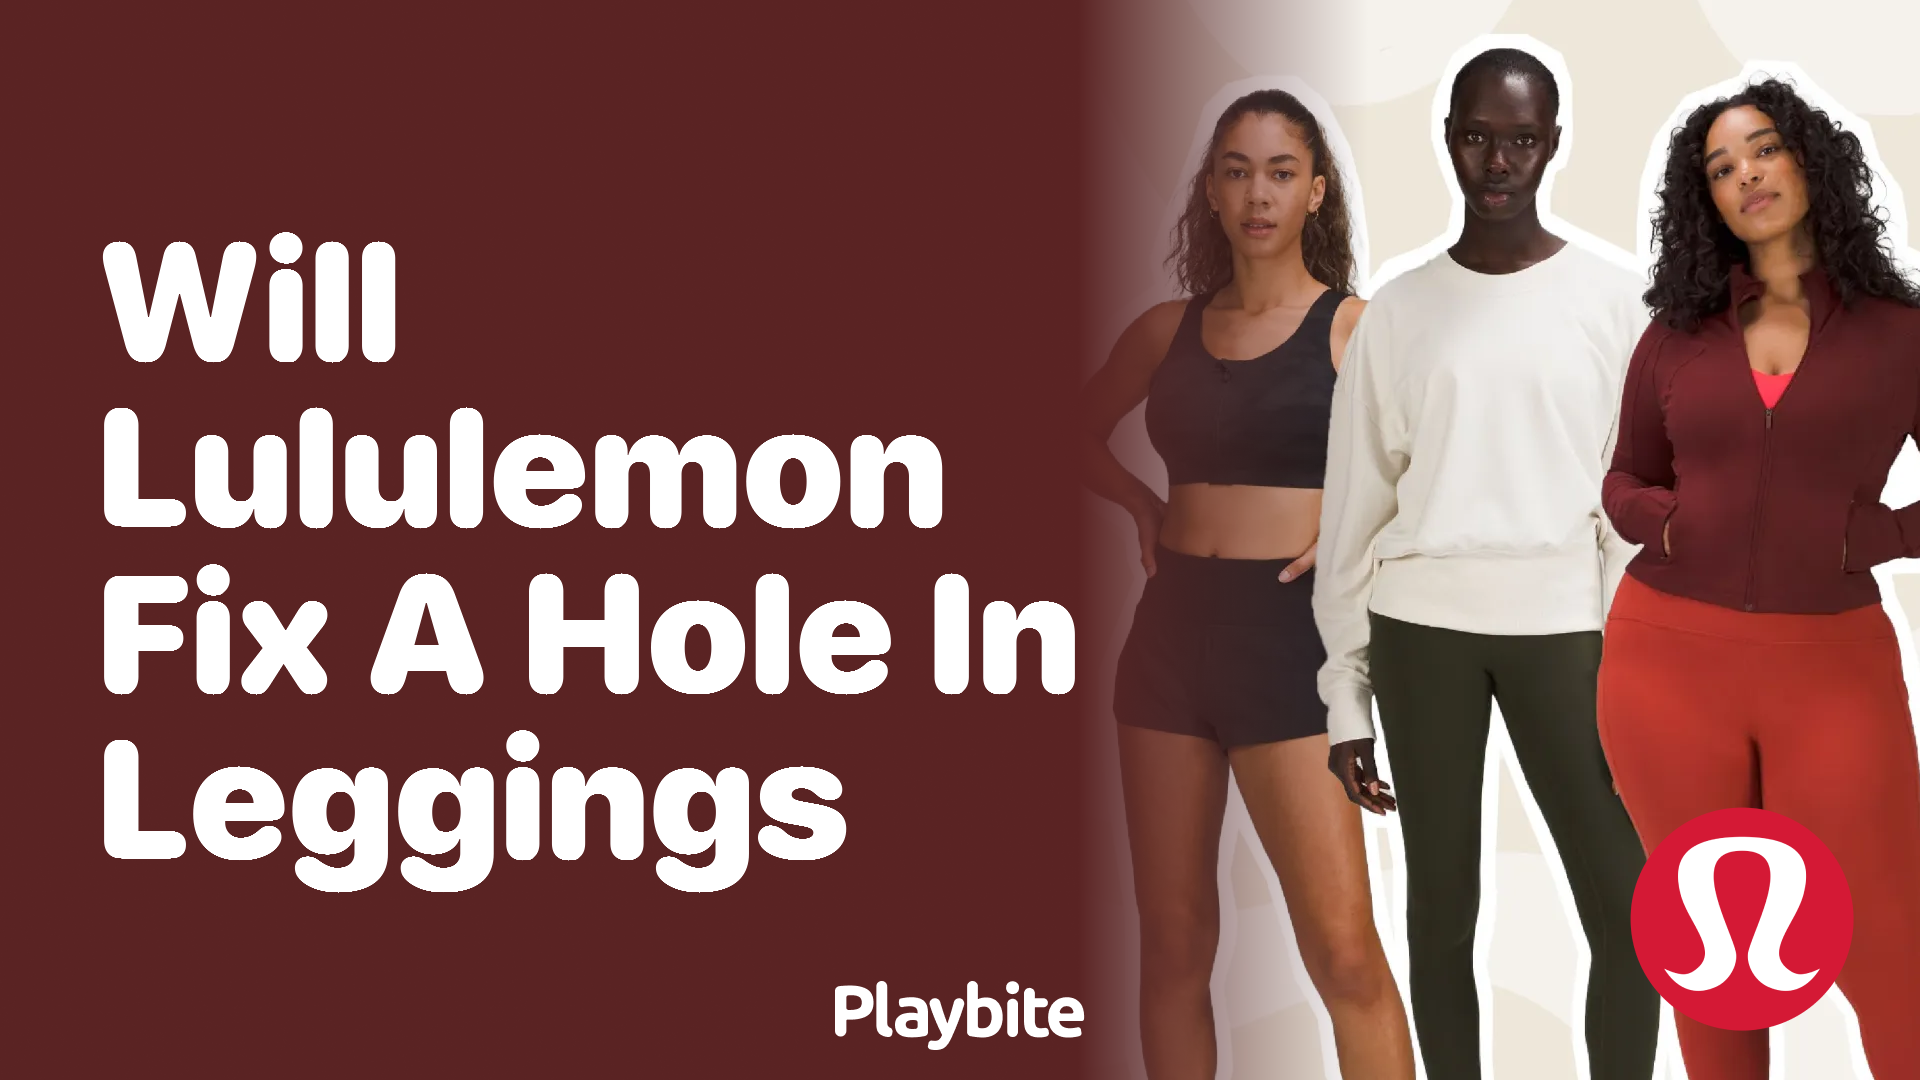 Will Lululemon Fix a Hole in Your Leggings? Here's What You Need